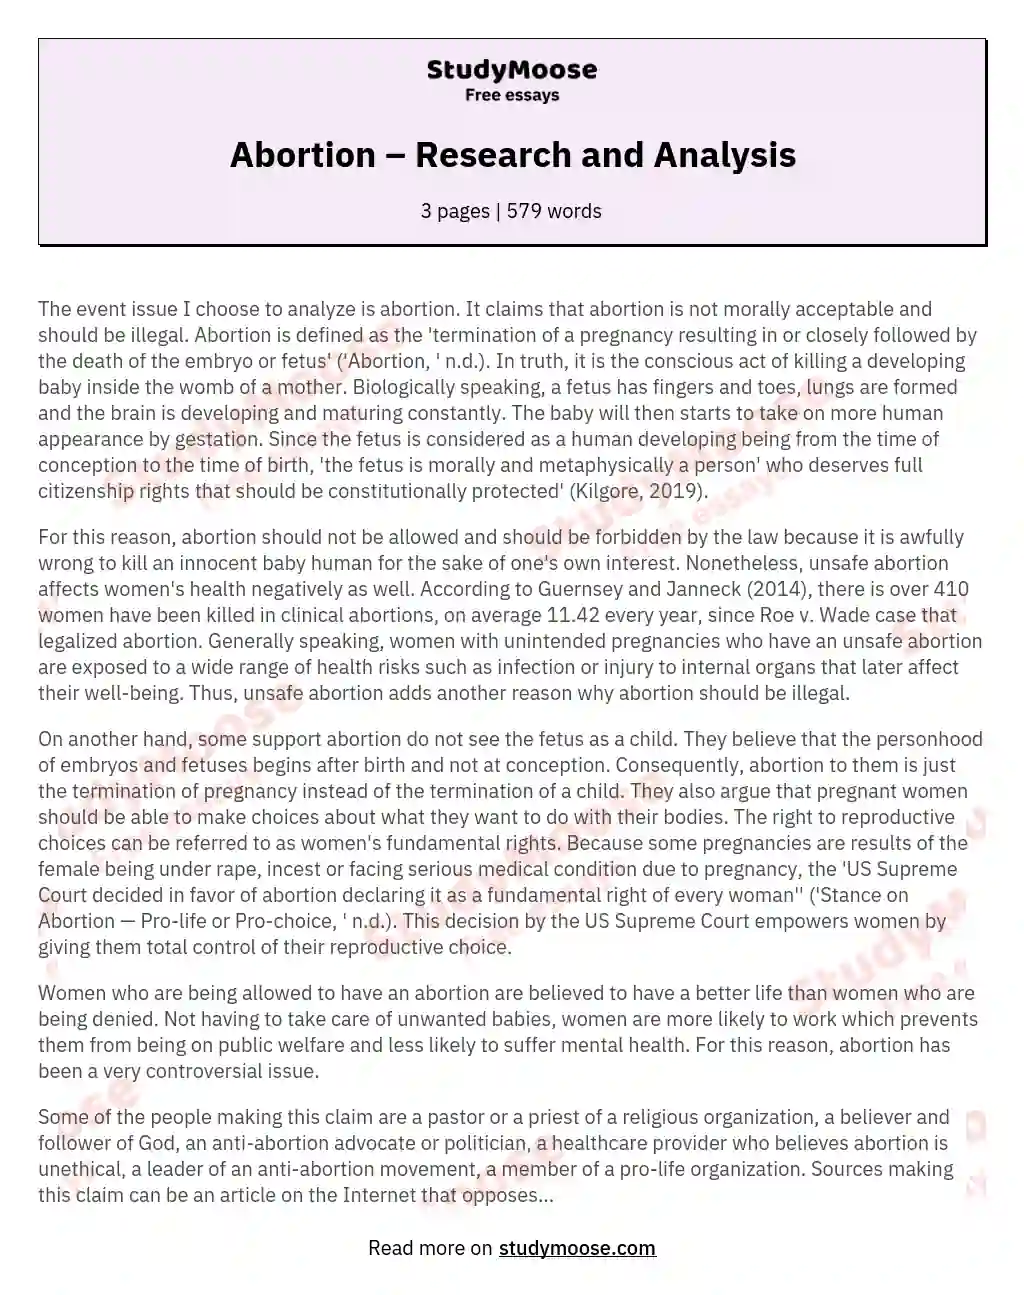 Abortion – Research and Analysis essay